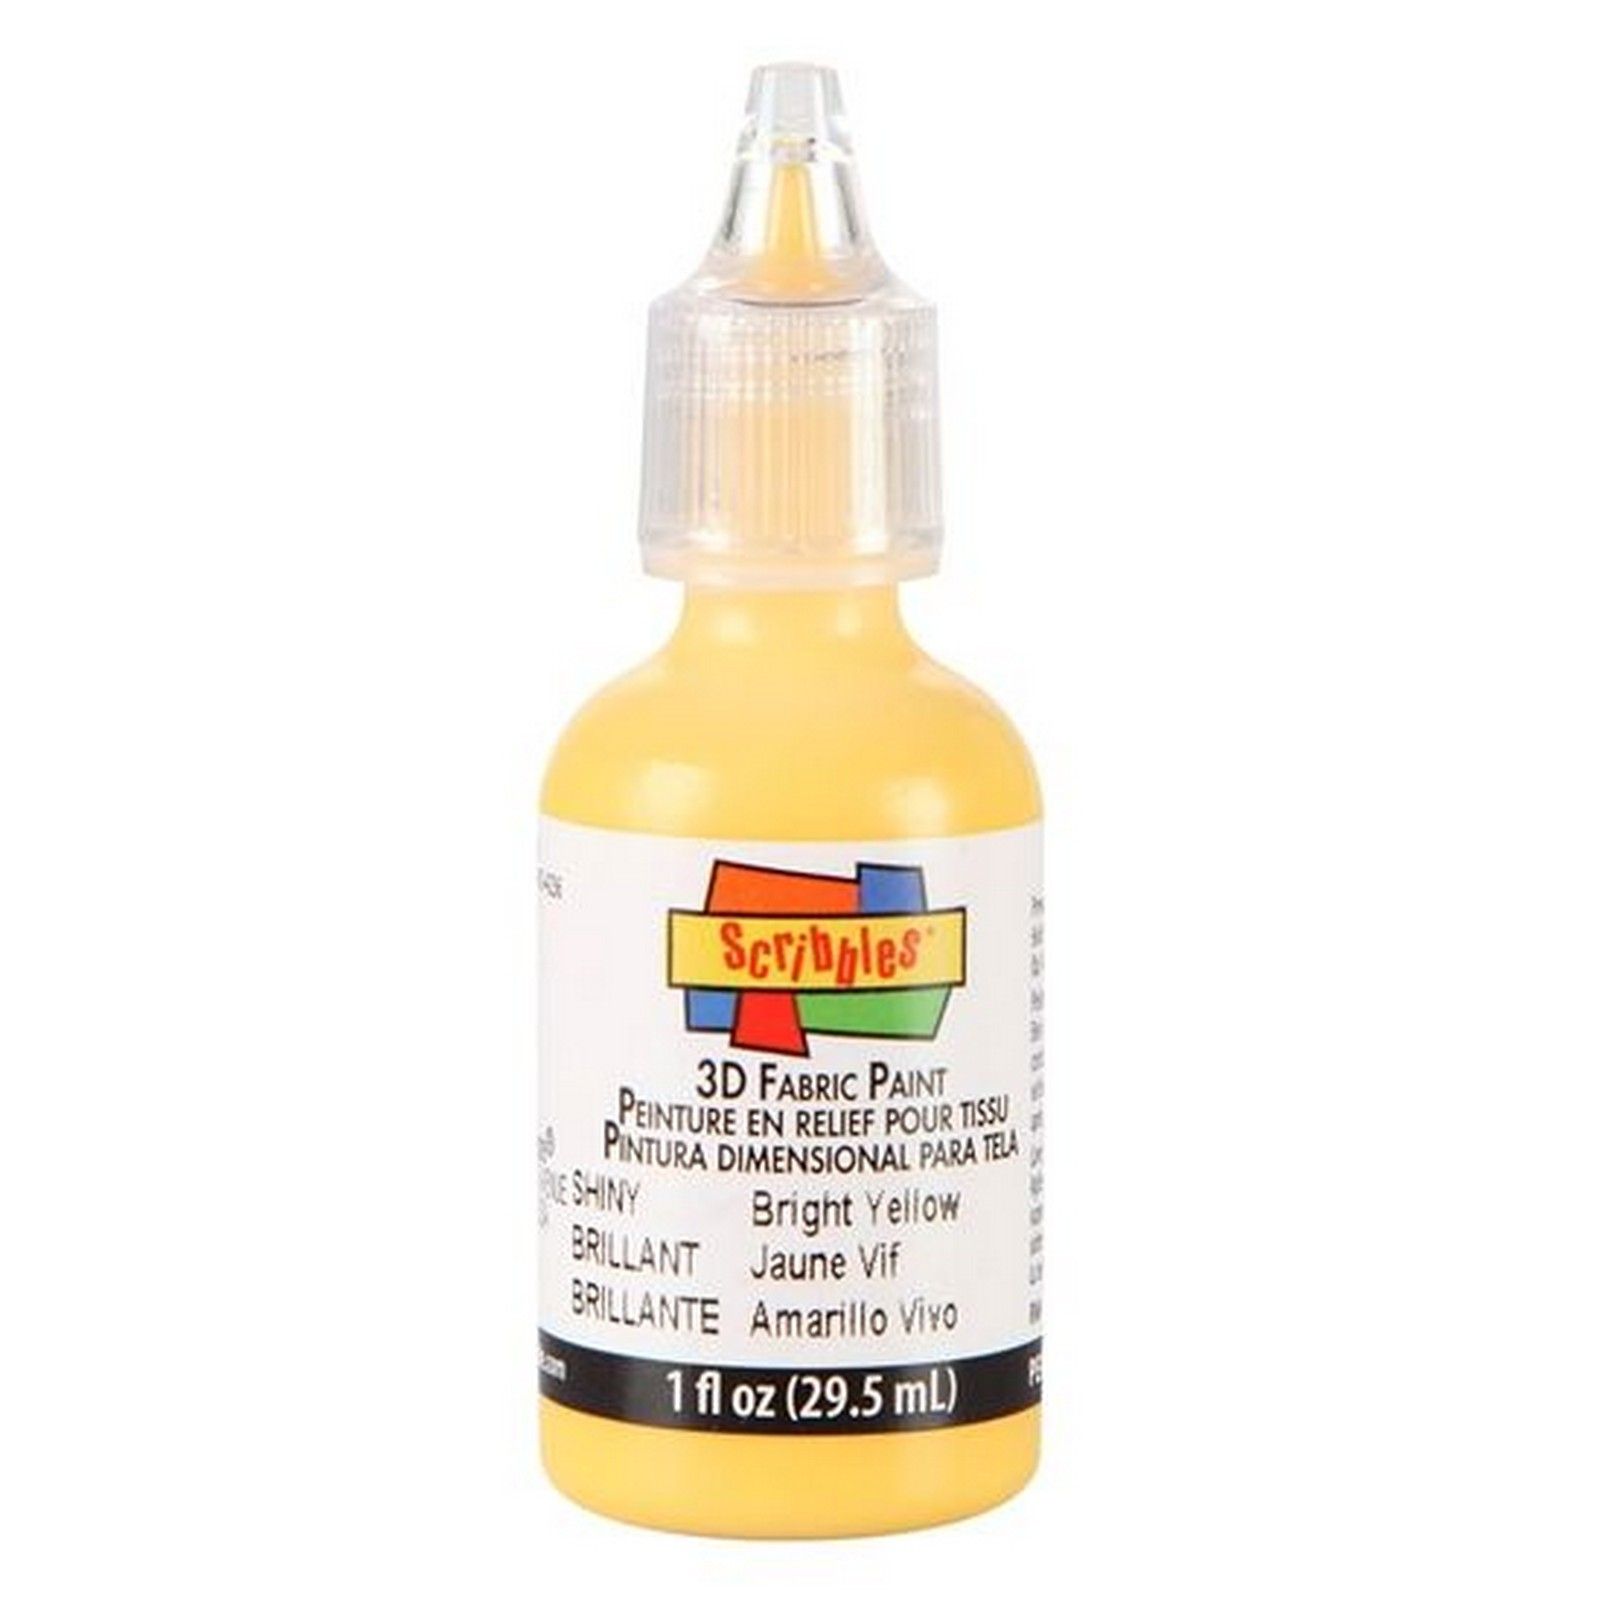 Scribbles • 3D Fabric Paint Shiny 29.5ml Bright Yellow